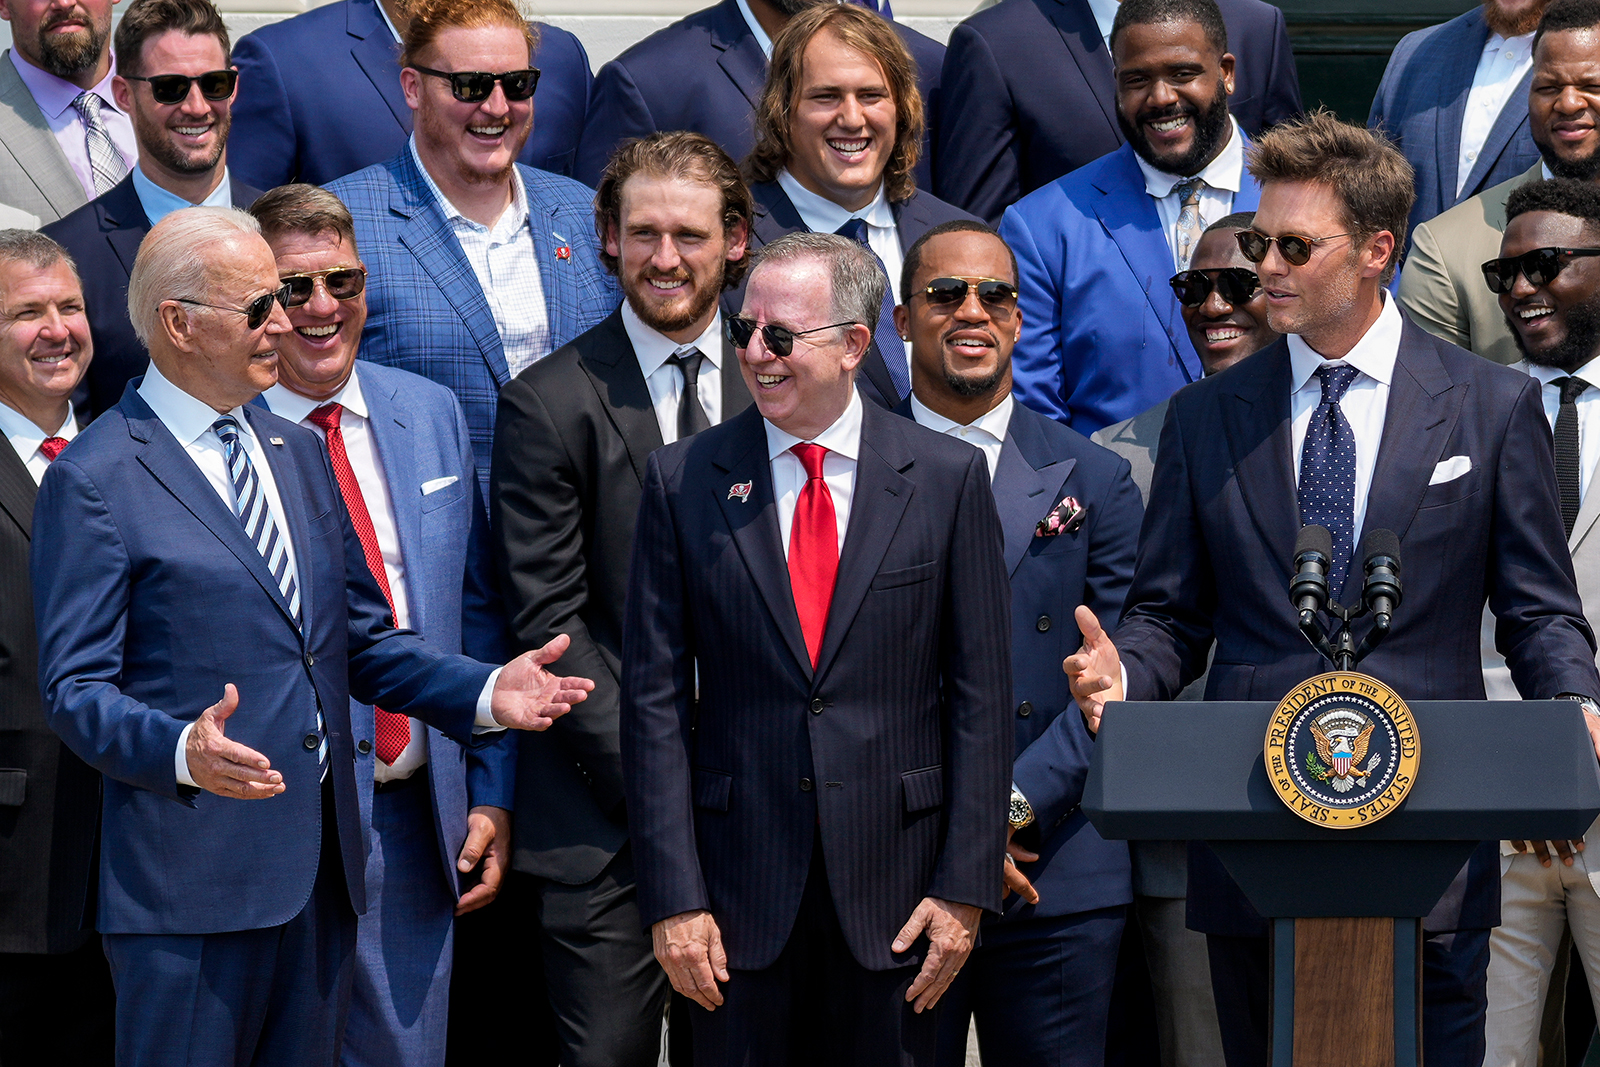 President Joe Biden laughs as quarterback Tom Brady jokes while speaking as the 2021 NFL Super Bowl champion Tampa Bay Buccaneers are welcomed to the South Lawn of the White House on July 20, 2021 in Washington, DC.